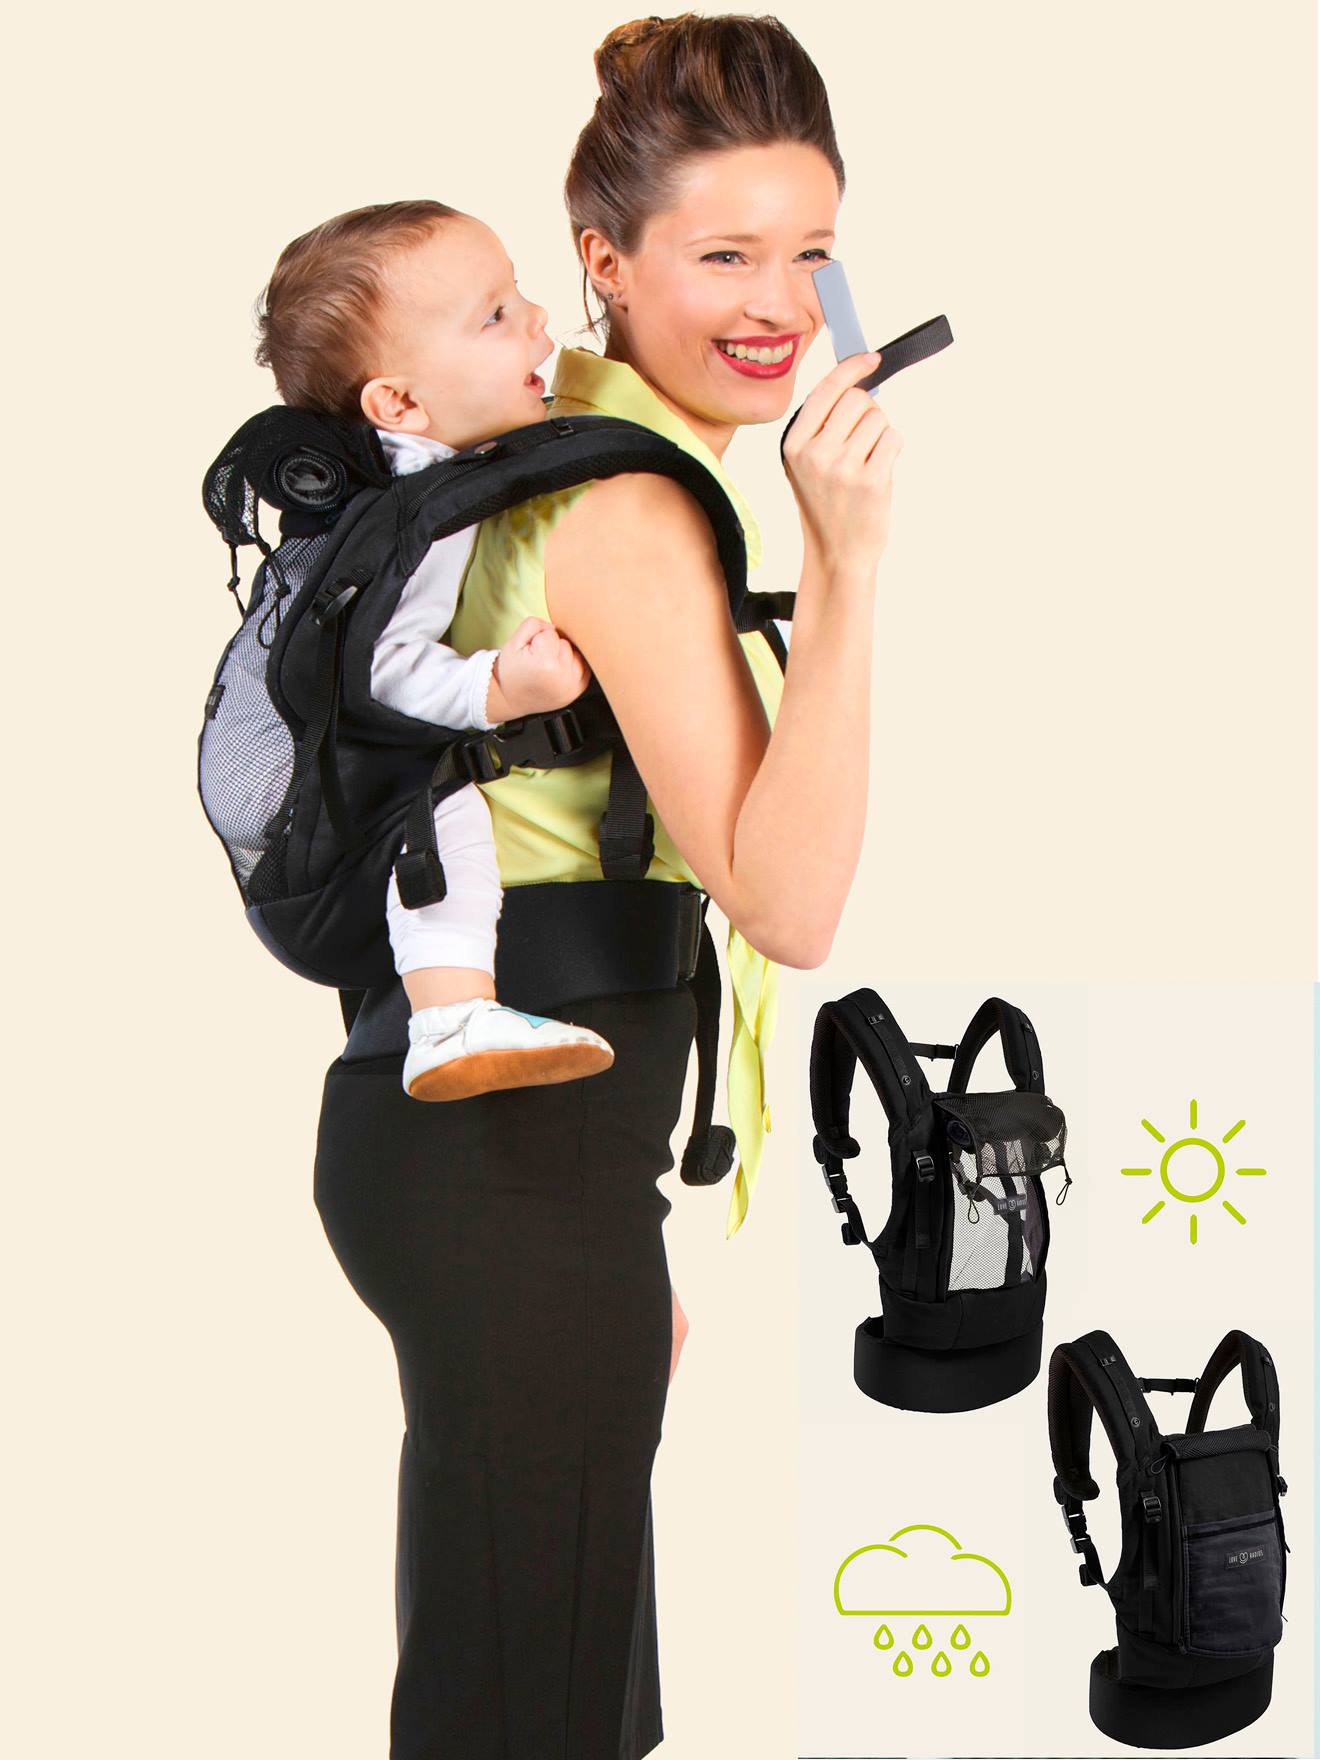 Physiocarrier Love Radius Cheaper Than Retail Price Buy Clothing Accessories And Lifestyle Products For Women Men